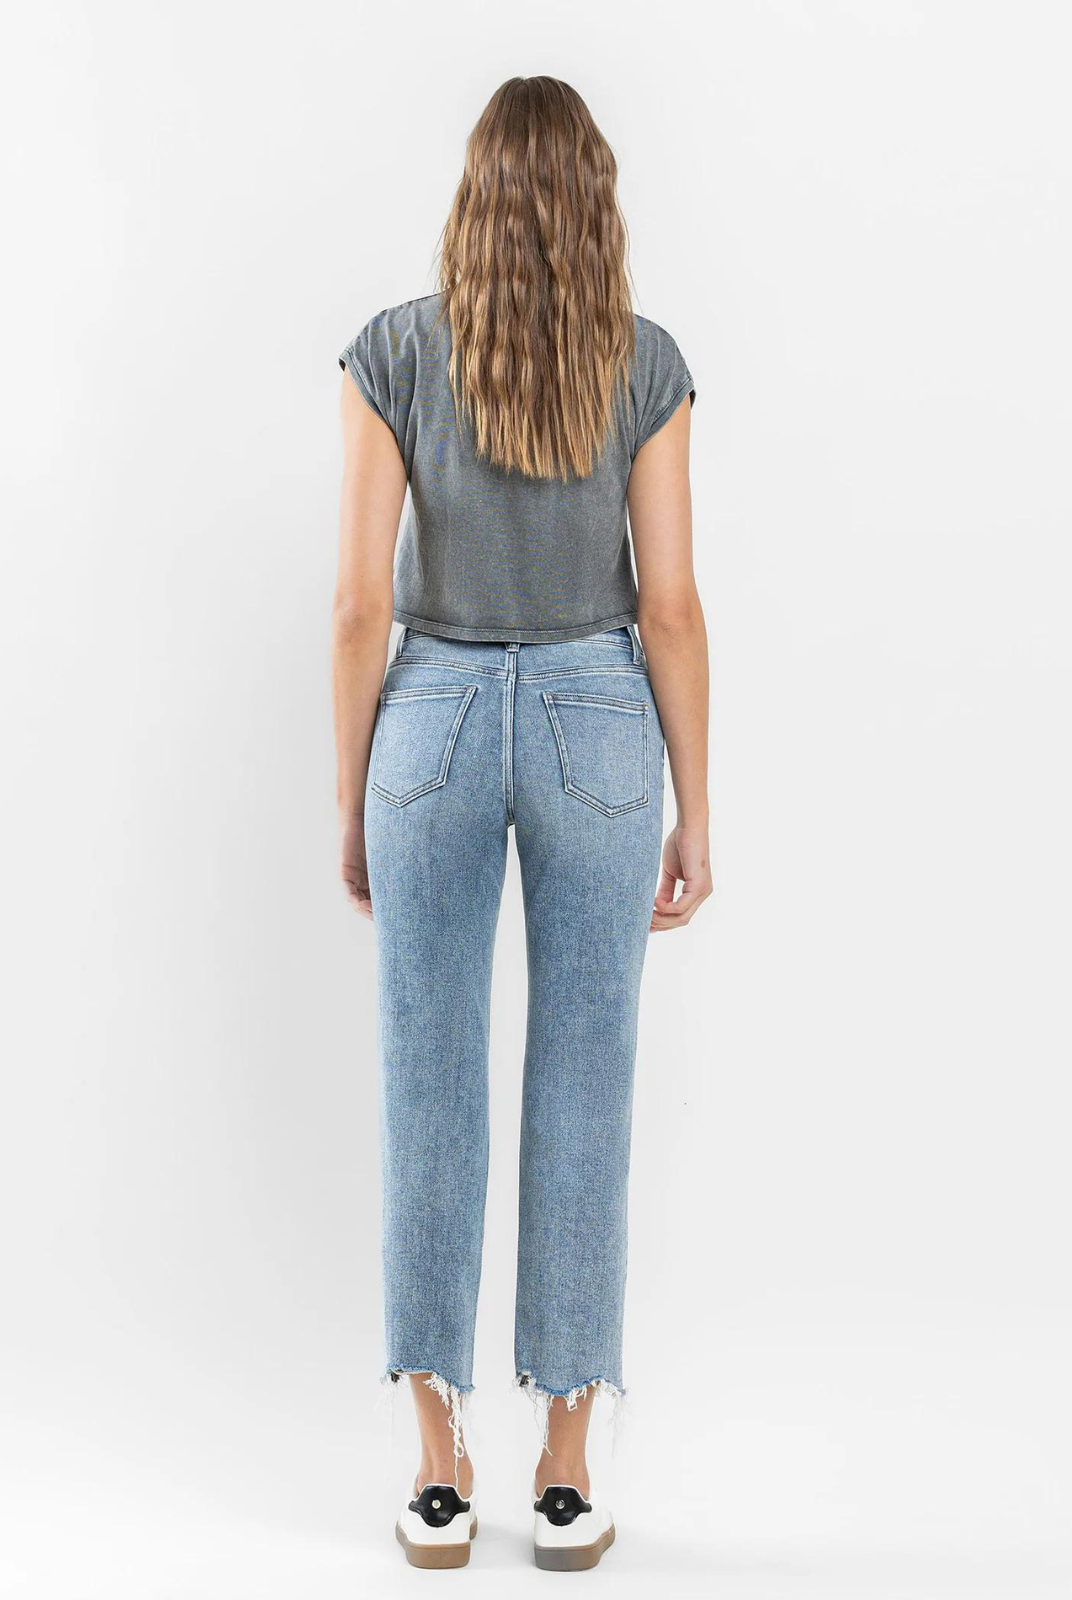 Flying Monkey High Rise Cropped Distress Hem- Ergonomical. The Ergonomical straight jeans provide comfort and a great fit. They feature a high-rise waist and are made of stretch denim for extra comfort. A distressed hem and cropped length complete the look.